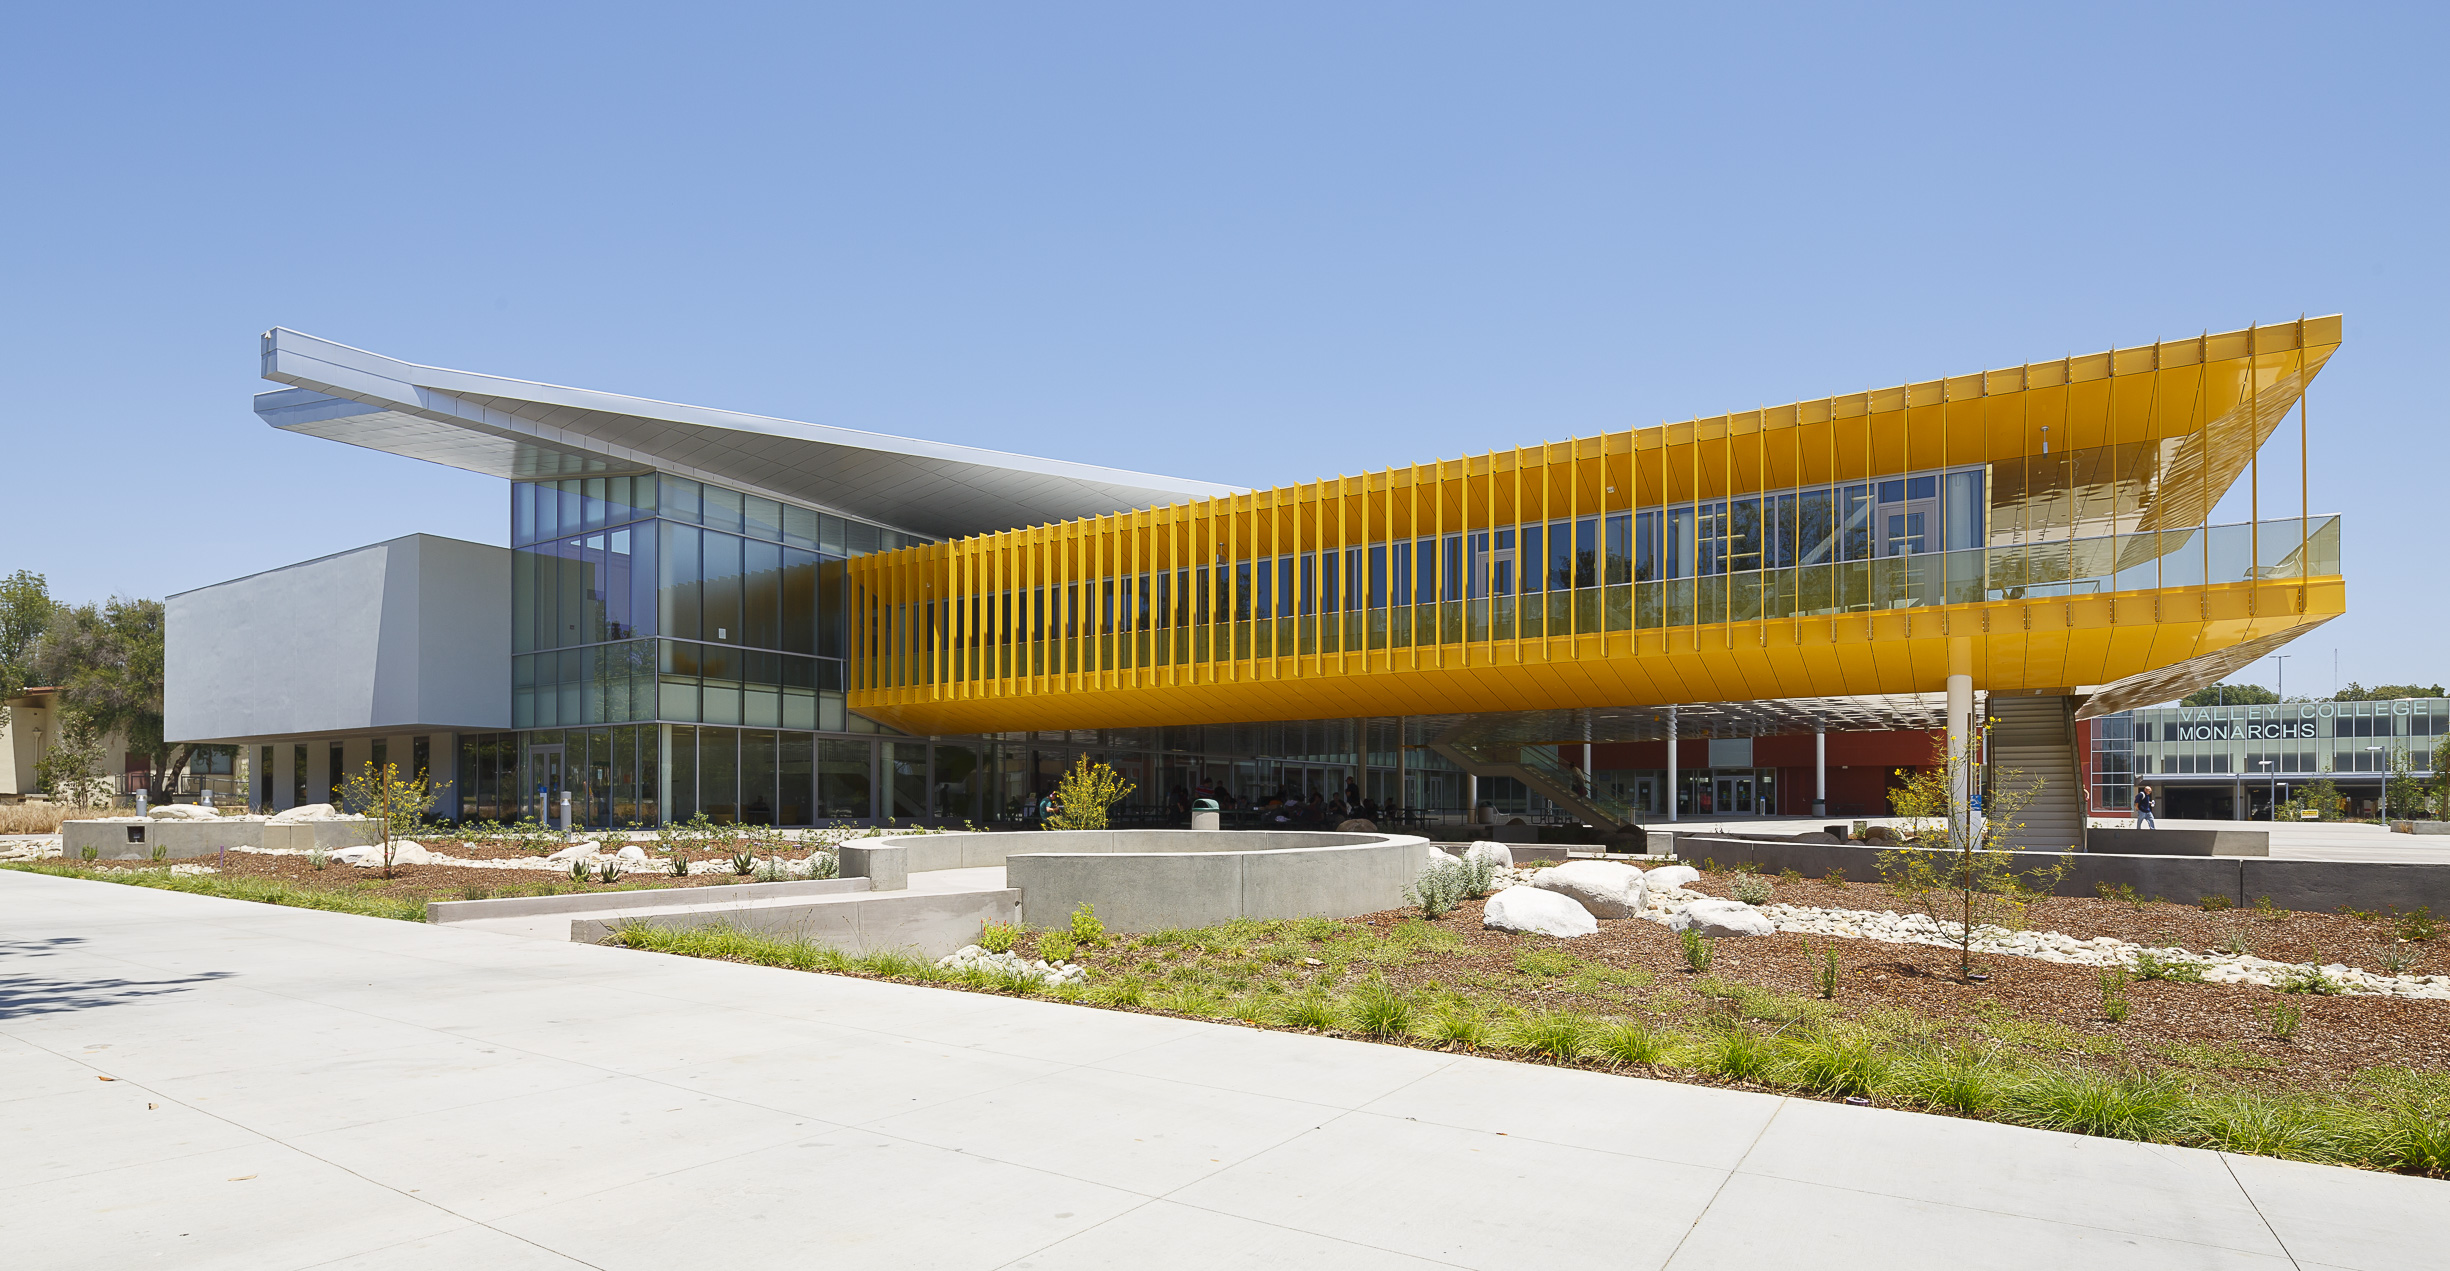 Los Angeles Valley College Completes New Student Center Designed by LPA